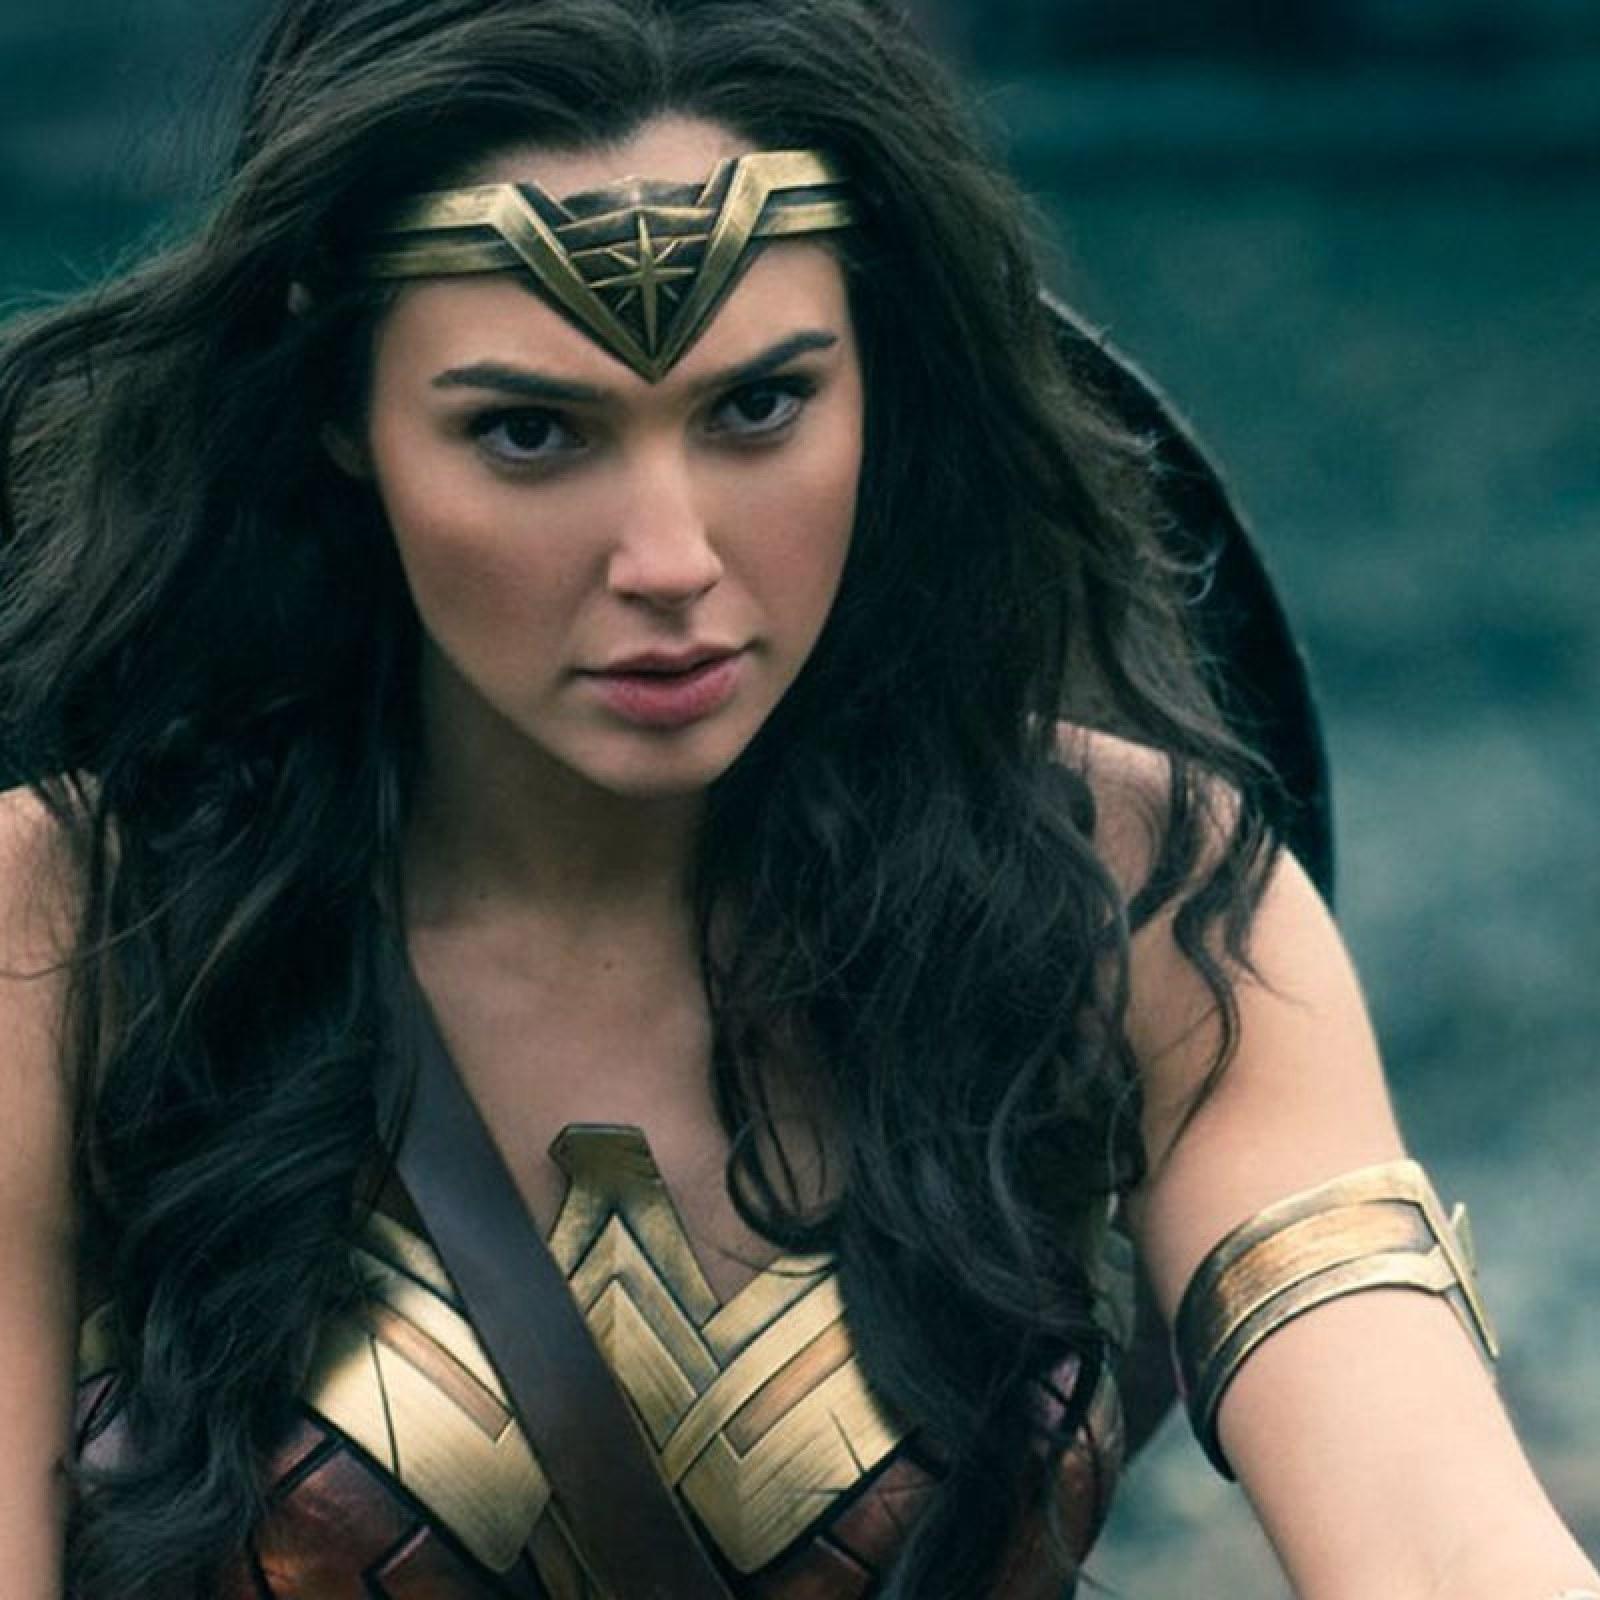 Wonder Woman 1984' Release Date Pushed Back to Summer 2020